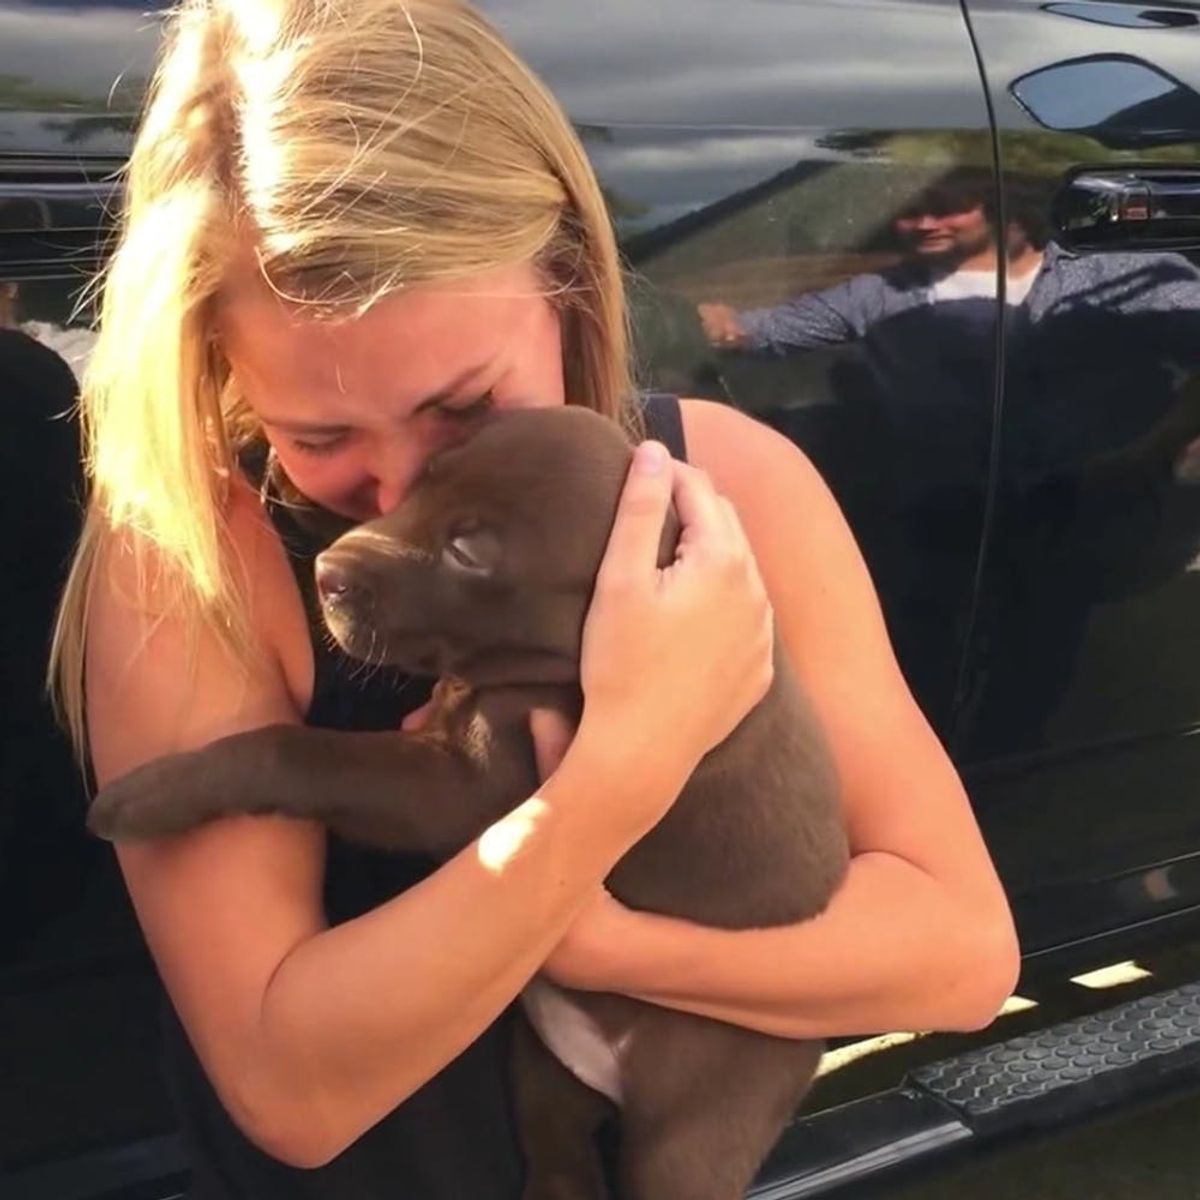 This Guy Who Proposed With a Puppy Is Our Hero